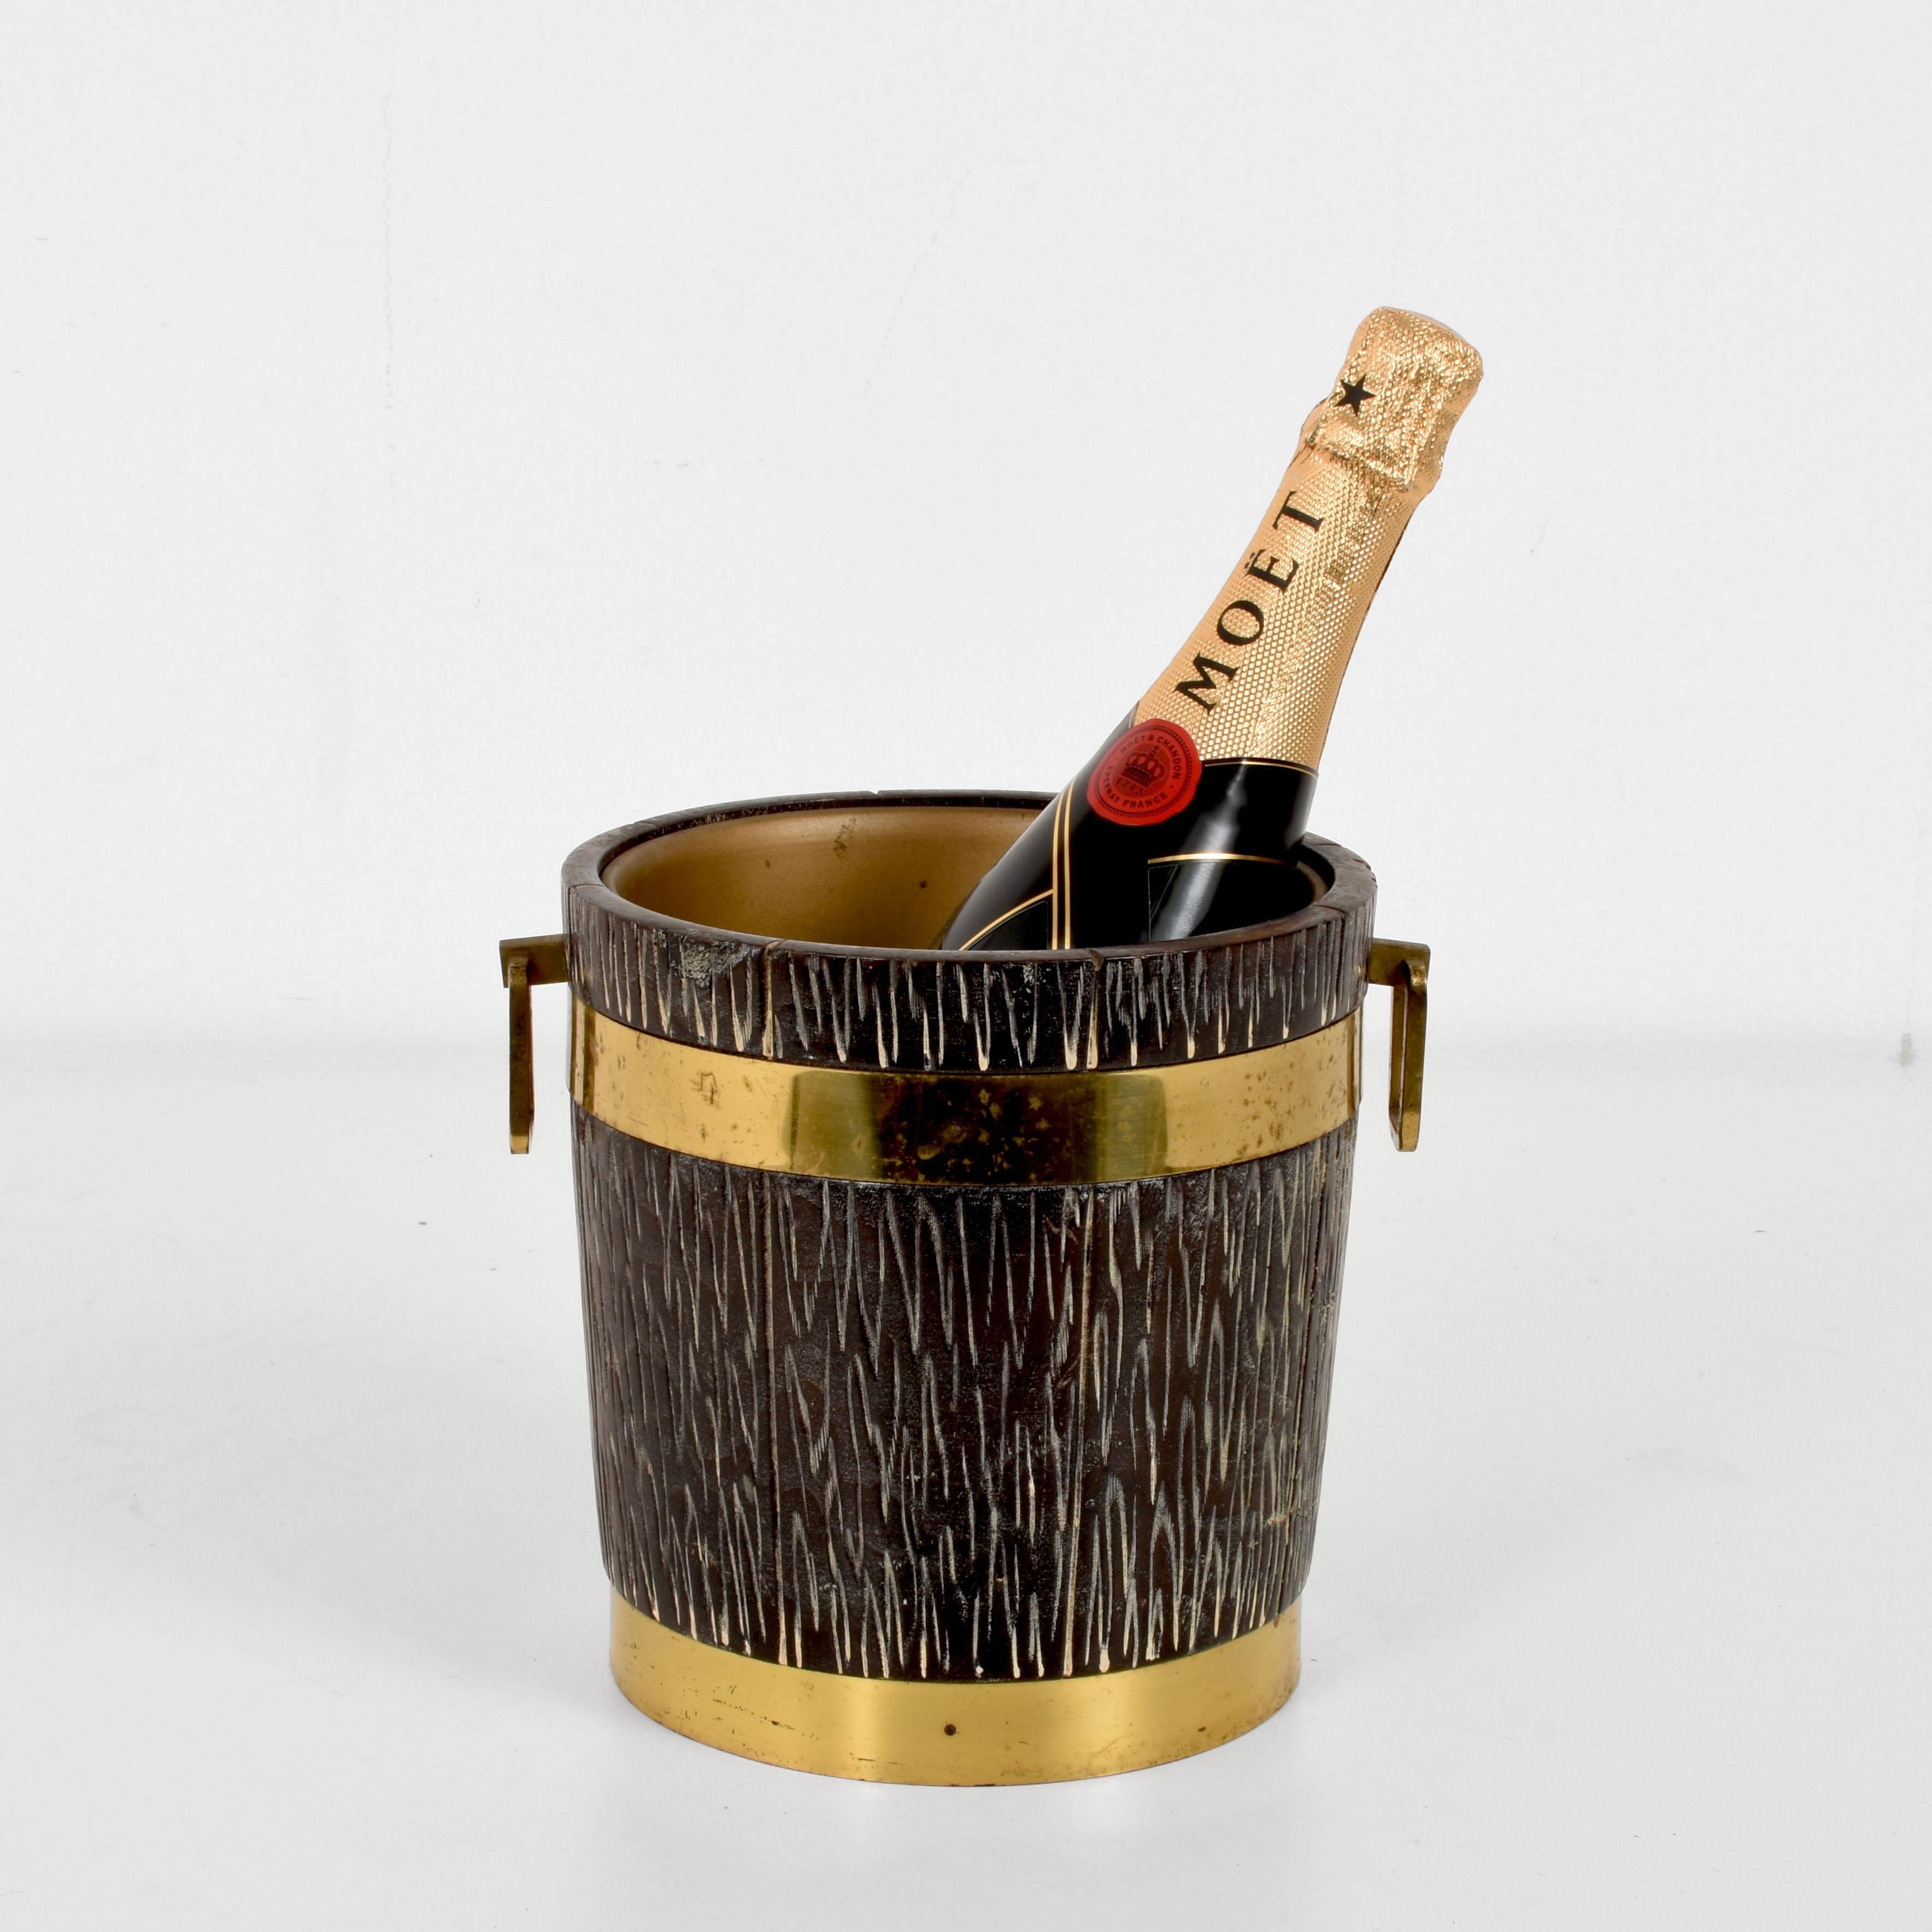 Aluminum Ice Bucket for Macabo in Carved Wood and Brass, Italy 1950s by Aldo Tura